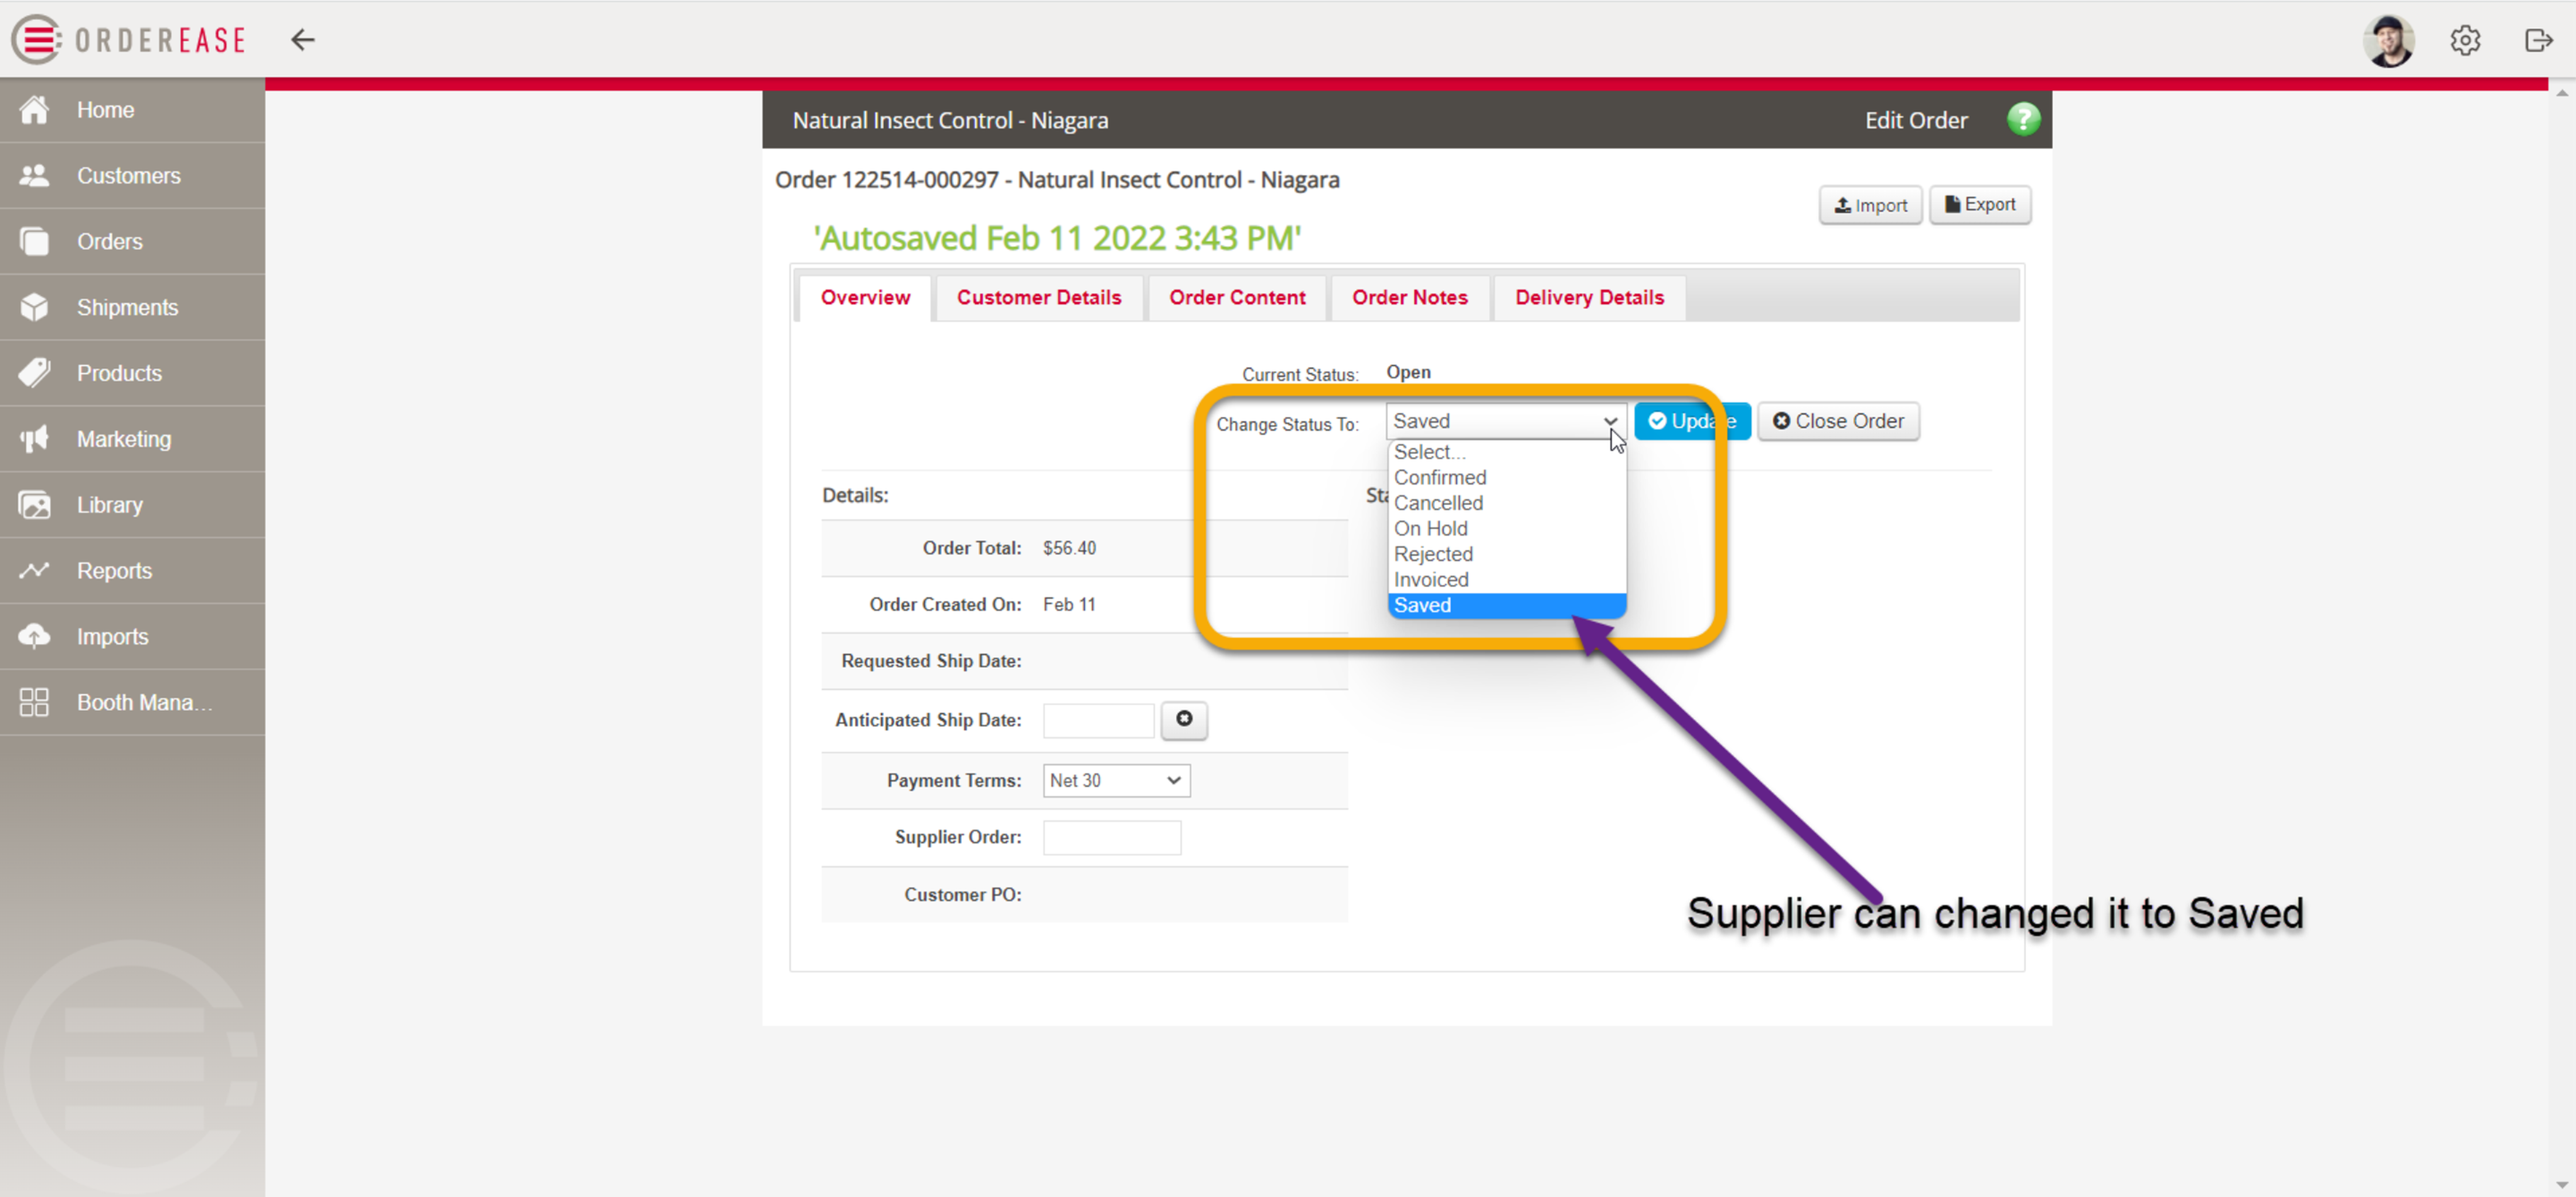 6 - Showing where a supplier can change an order status to Saved